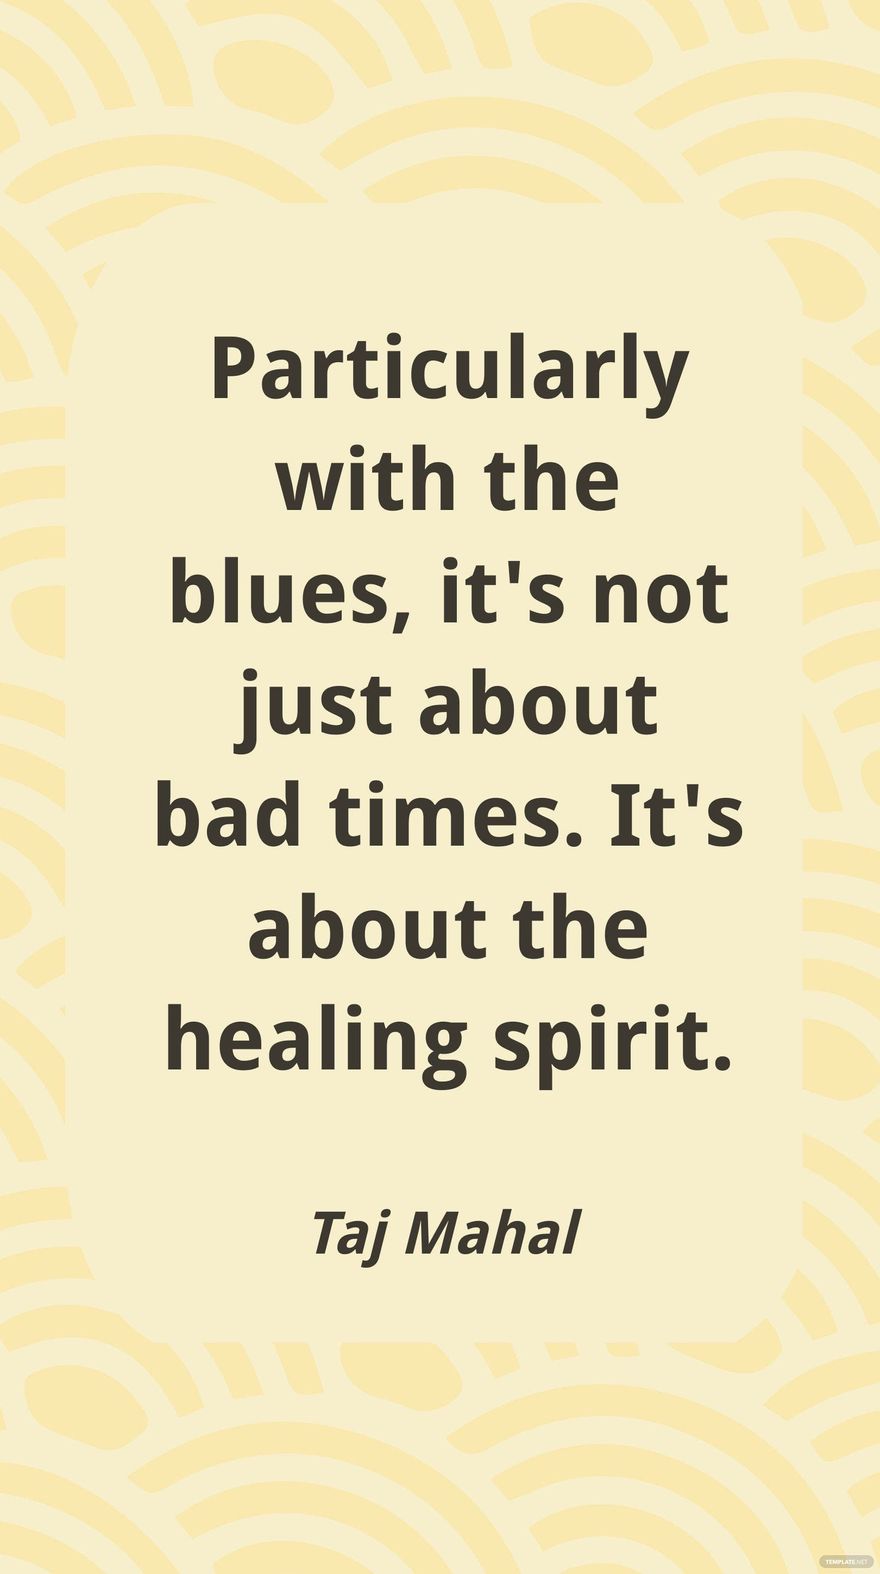 Free Taj Mahal - Particularly with the blues, it's not just about bad times. It's about the healing spirit. in JPG